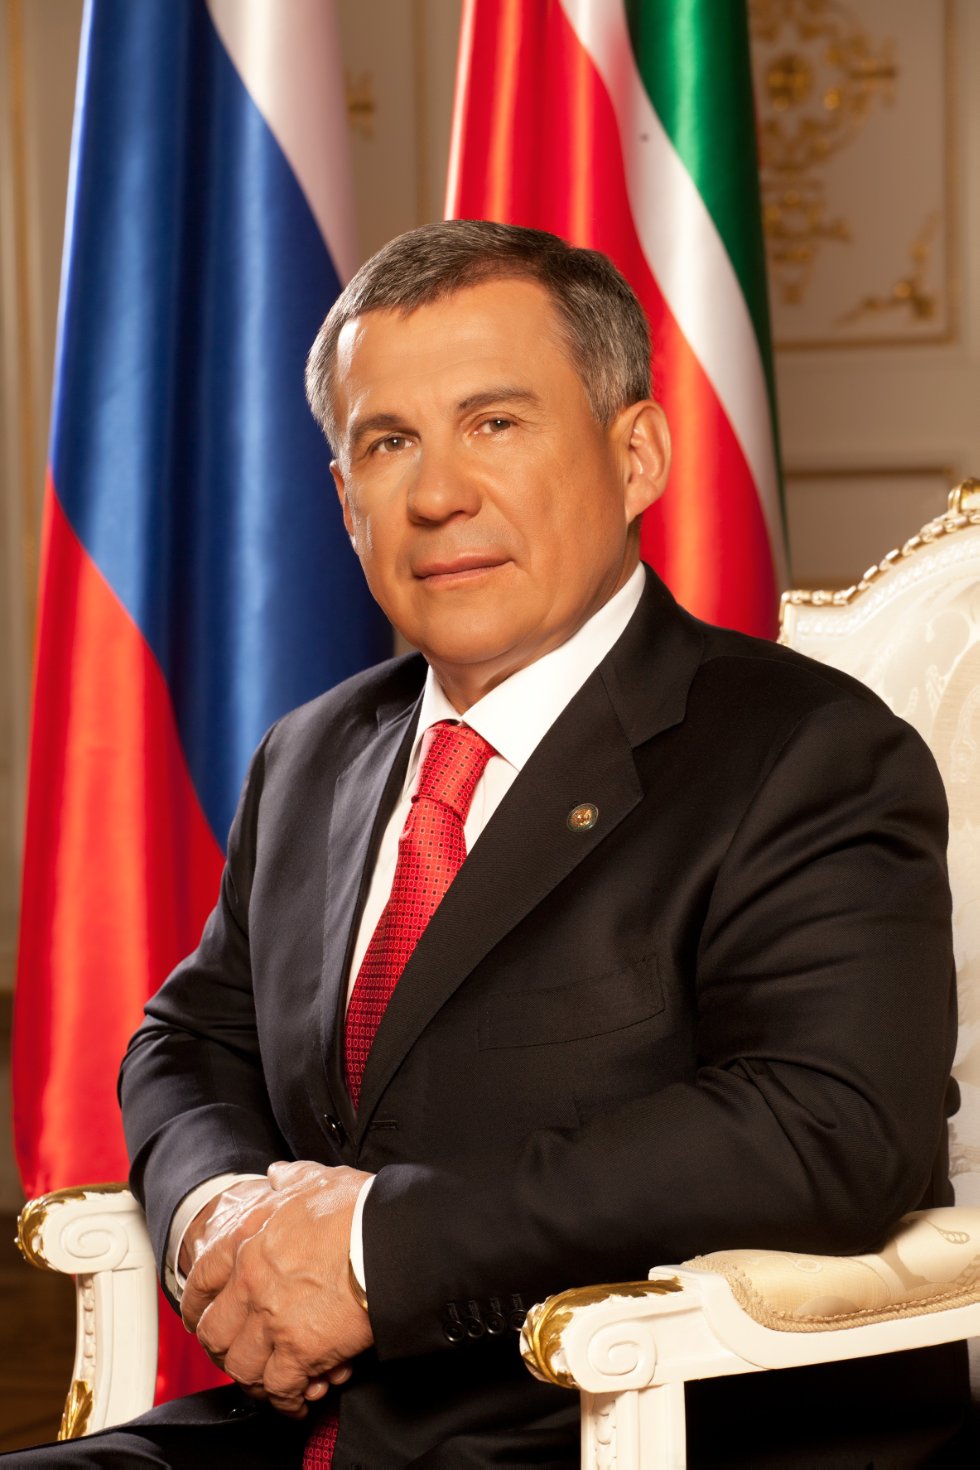 WELCOME ADDRESS BY THE PRESIDENT OF THE REPUBLIC OF TATARSTAN RUSTAM MINNIKHANOV ON THE OCCASION OF THE FIRST ISSUE OF TATARICA JOURNAL